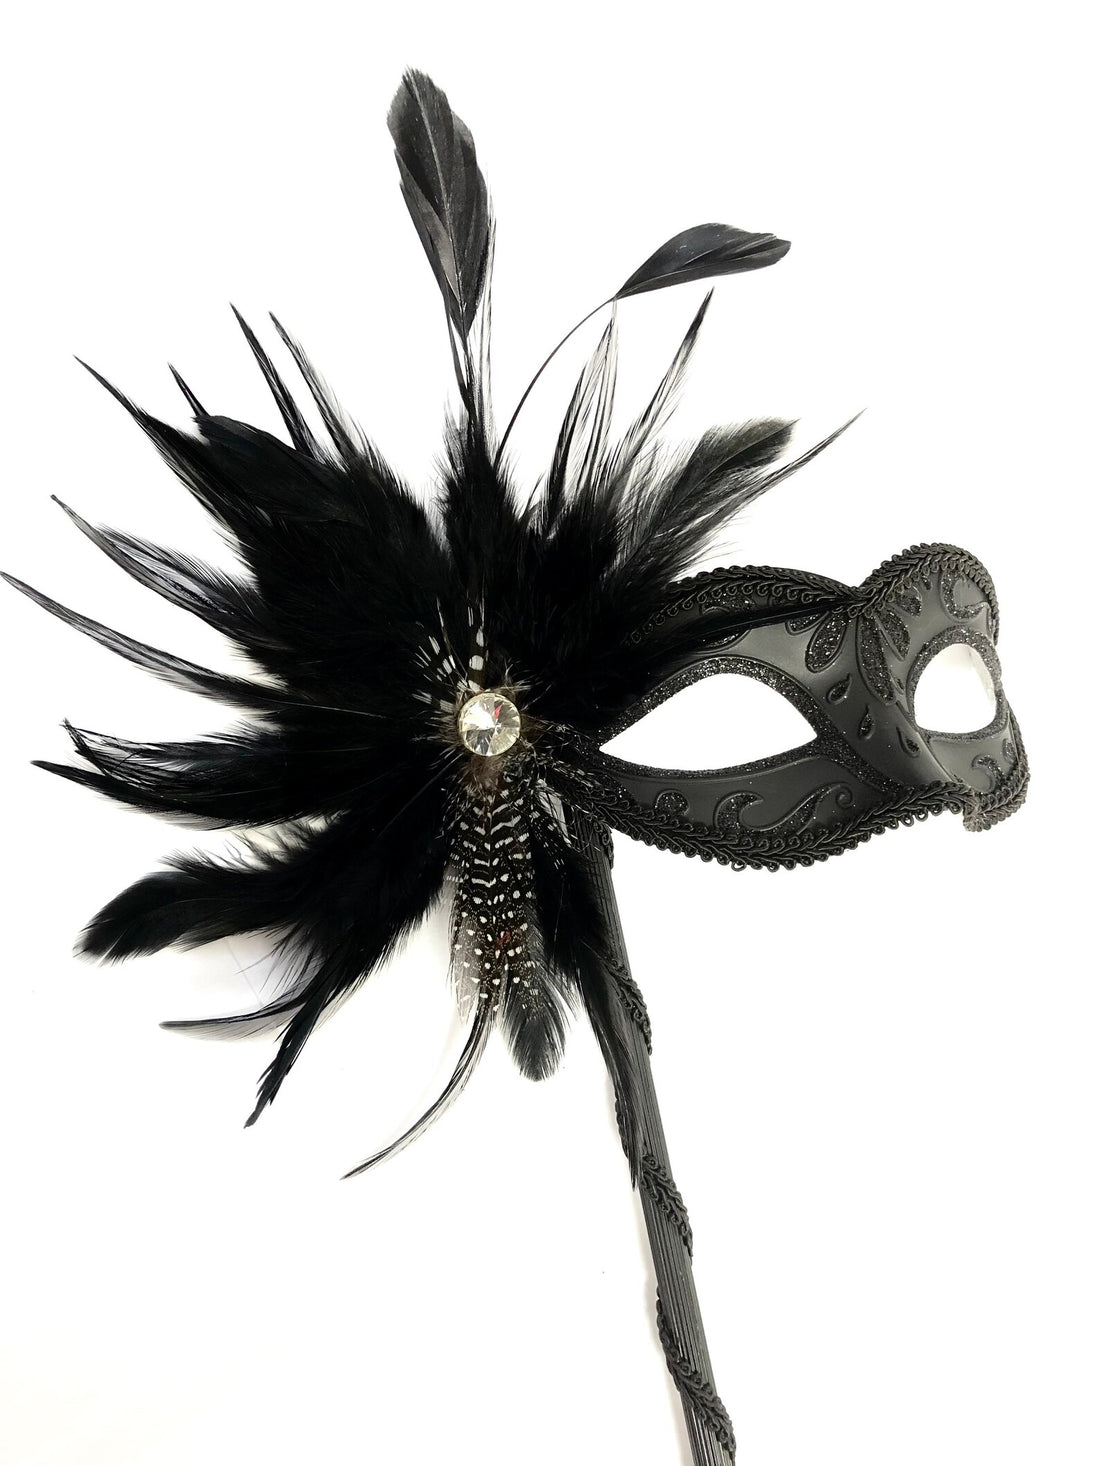 Womens masquerade mask on a handheld stick with feathers for sale.